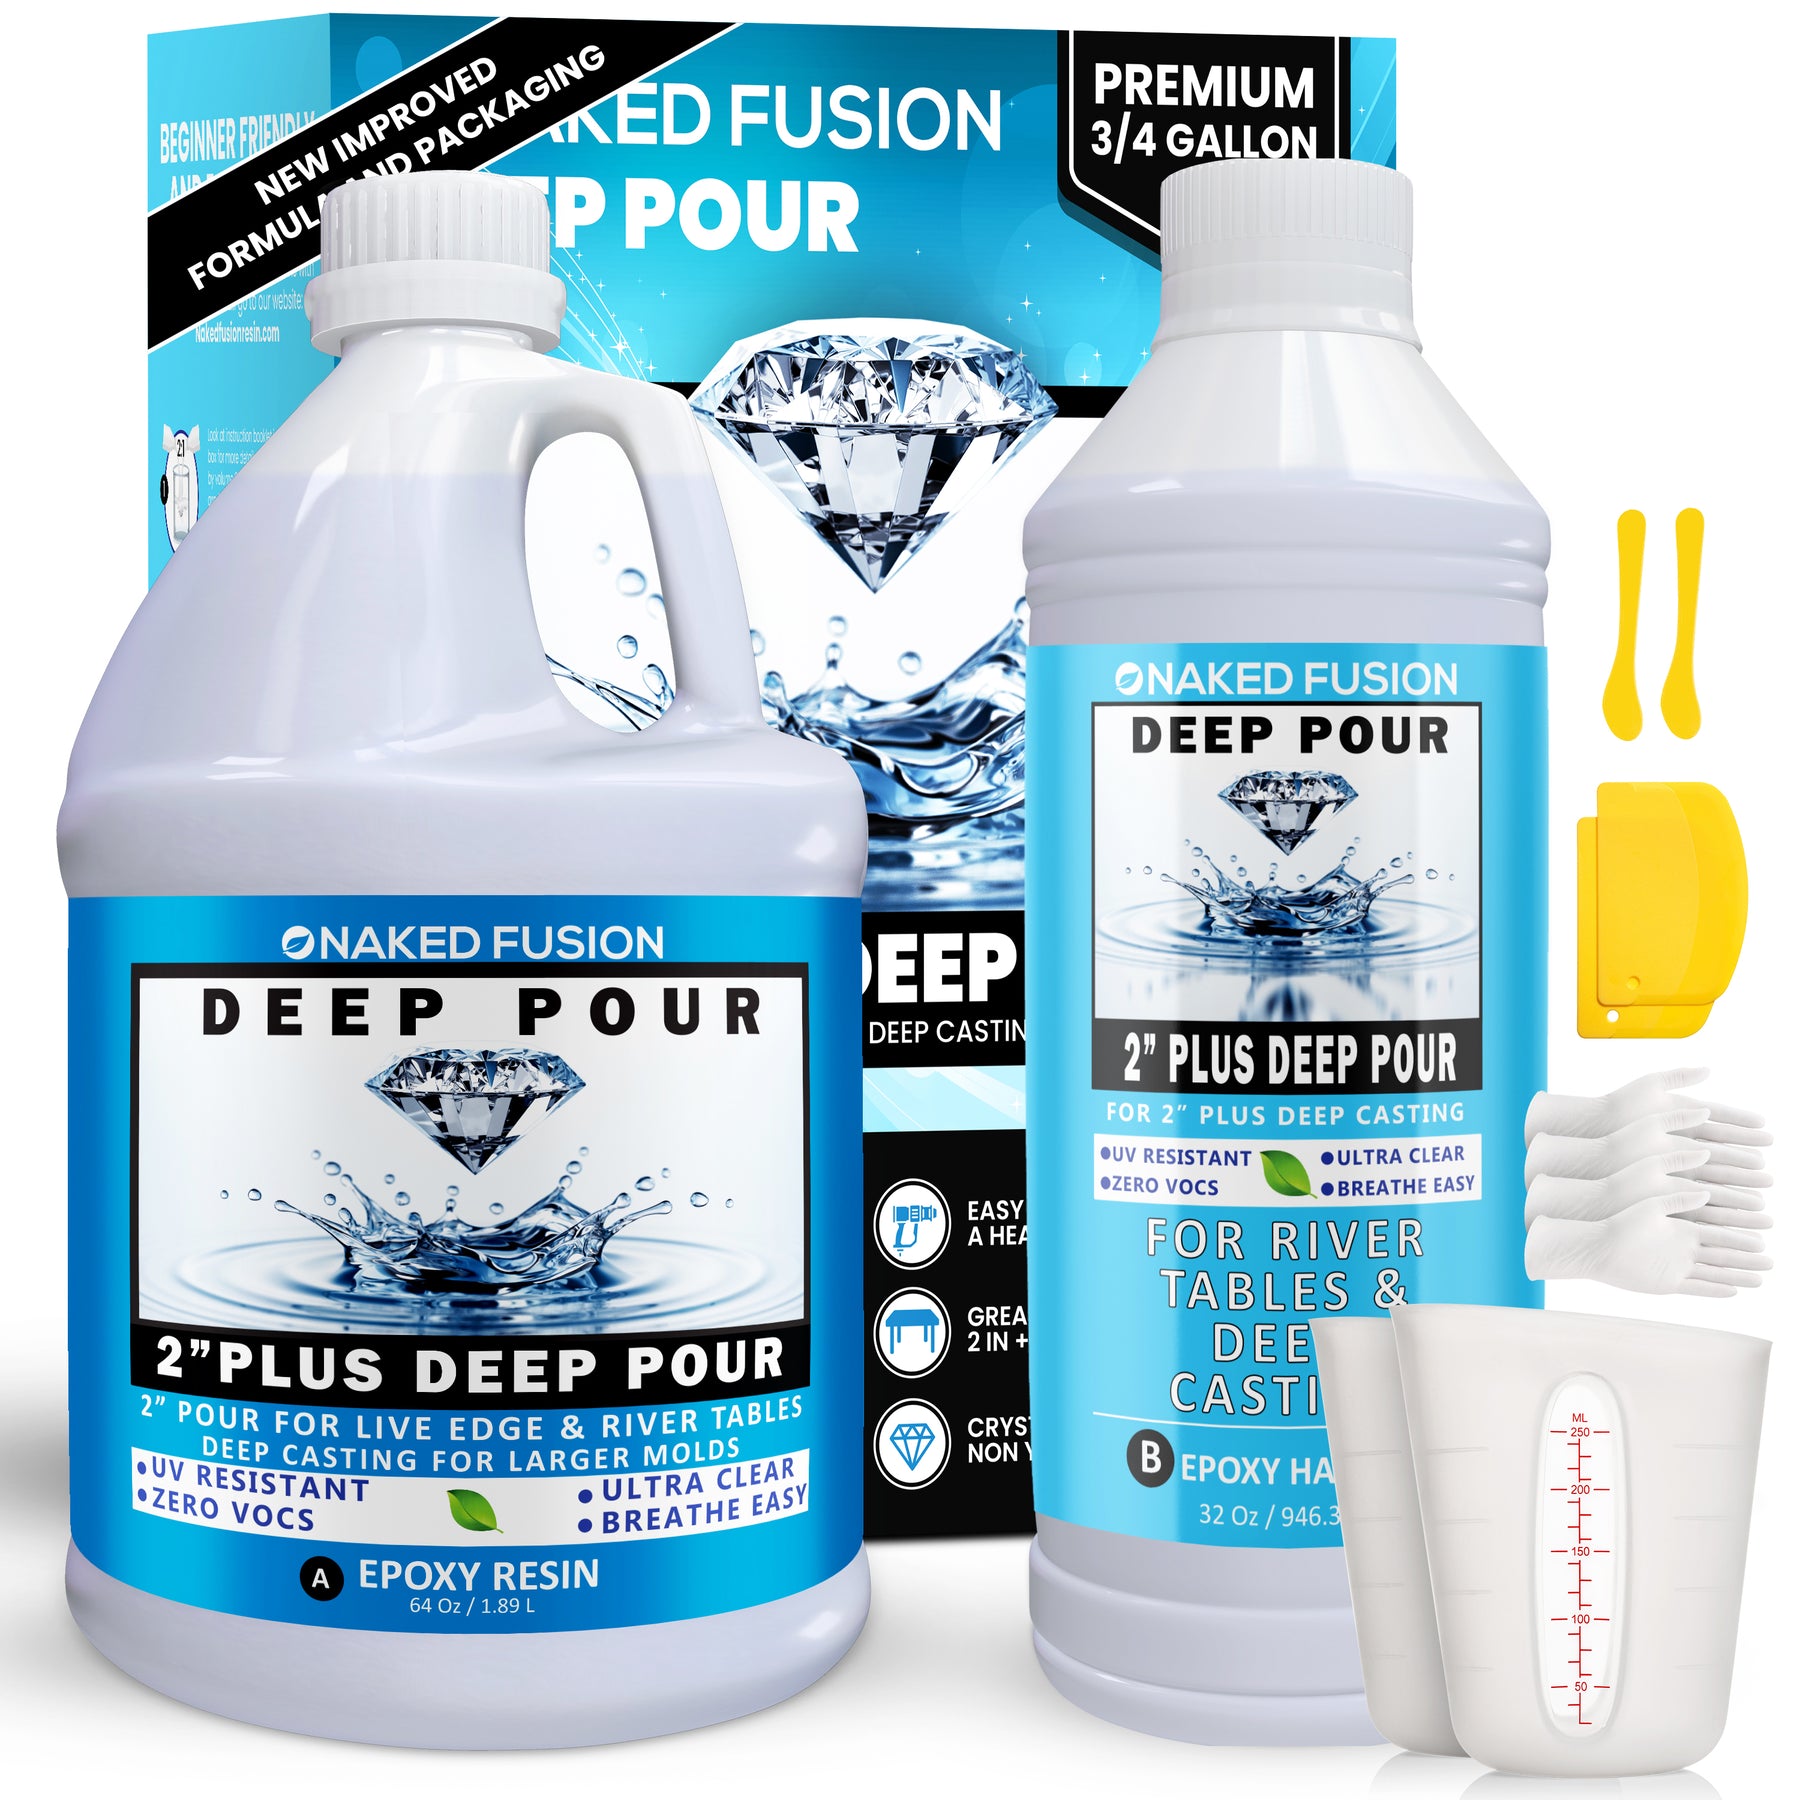 NAKED FUSION- DEEP POUR 3/4 GALLON KIT -NEW AND IMPROVED FORMULA